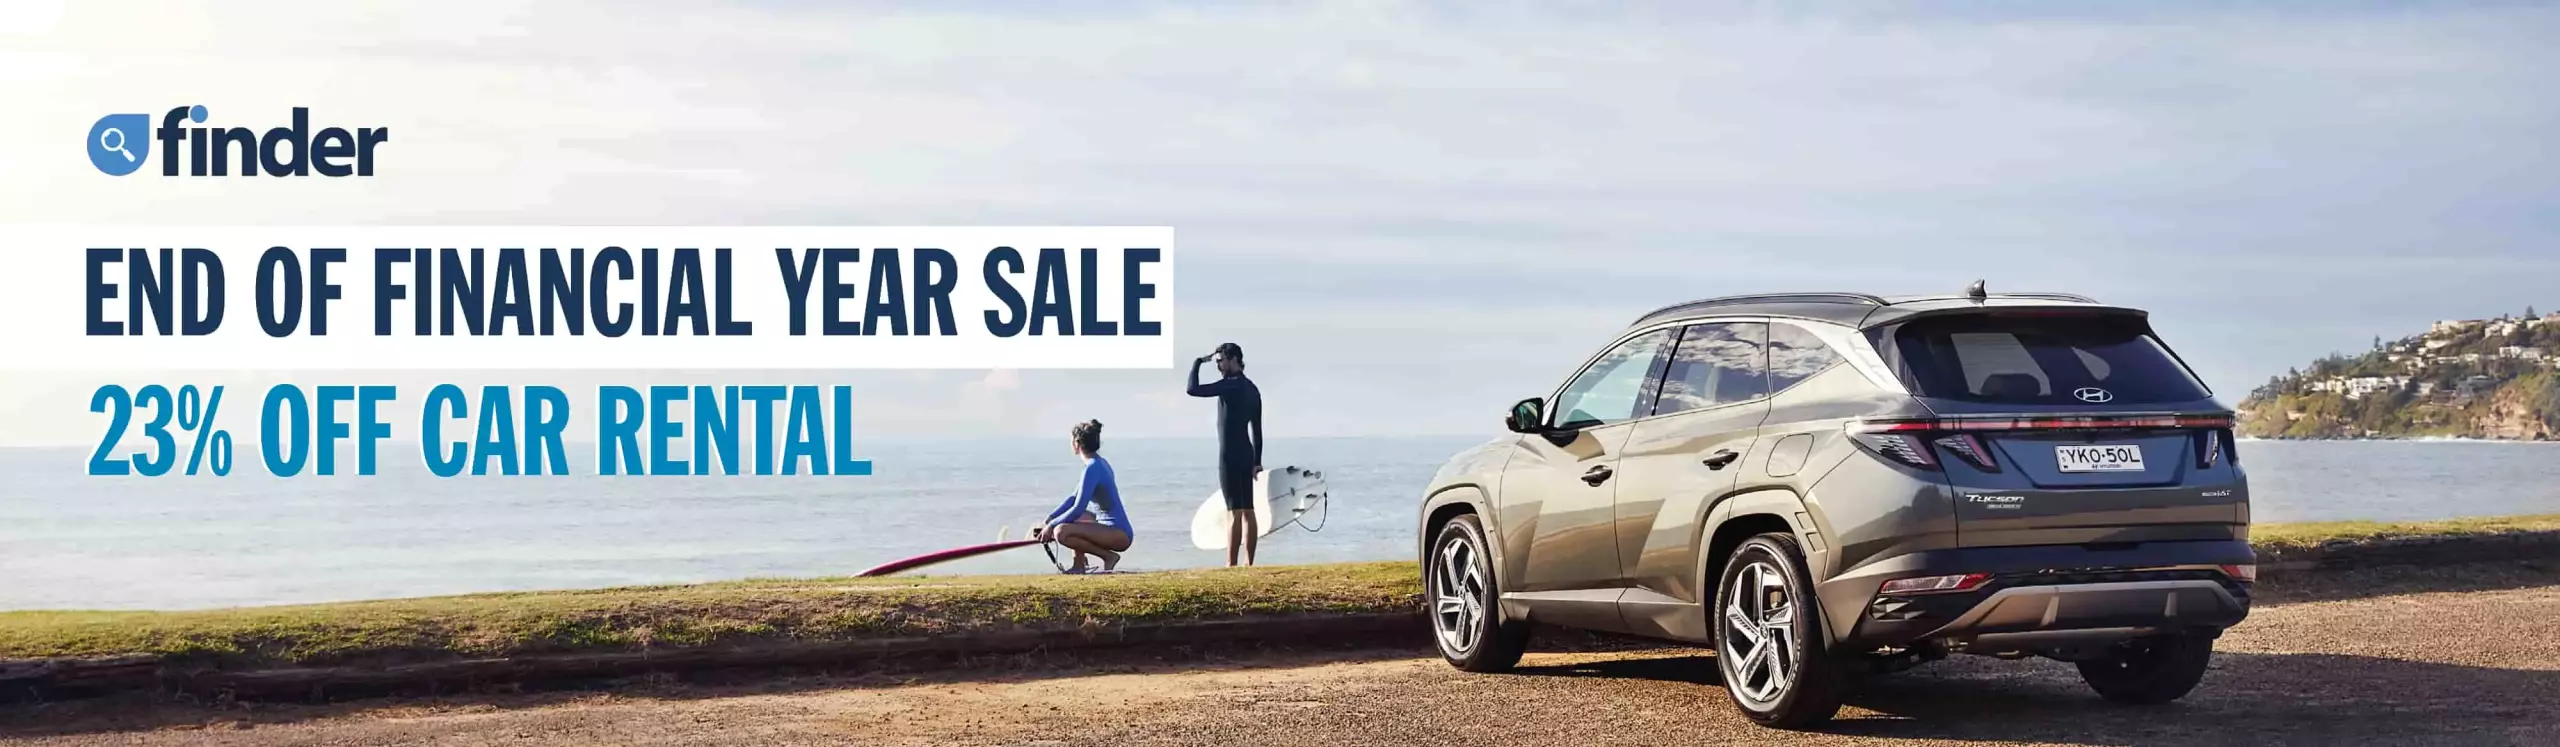 Finder - End of Financial Year Sale 23% Off All Car Rental